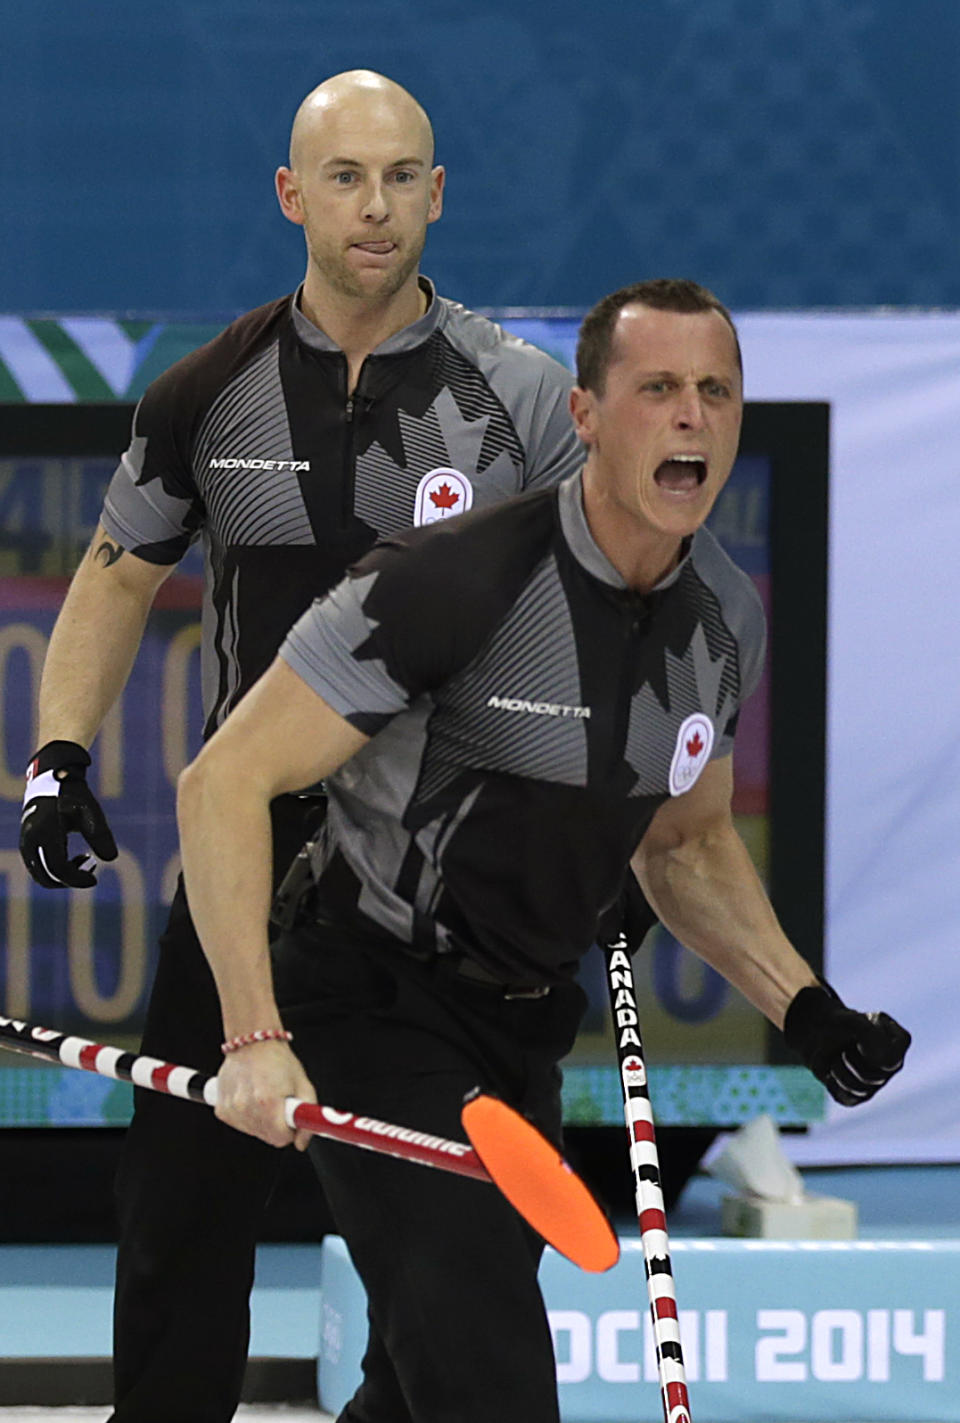 Canada's E.J. Harnden, right, and Ryan Fry, left, celebrate after skip Brad Jacobs delivered the rock to bring their team to a 4-point lead during the men's curling semifinal game against China at the 2014 Winter Olympics, Wednesday, Feb. 19, 2014, in Sochi, Russia. (AP Photo/Wong Maye-E)